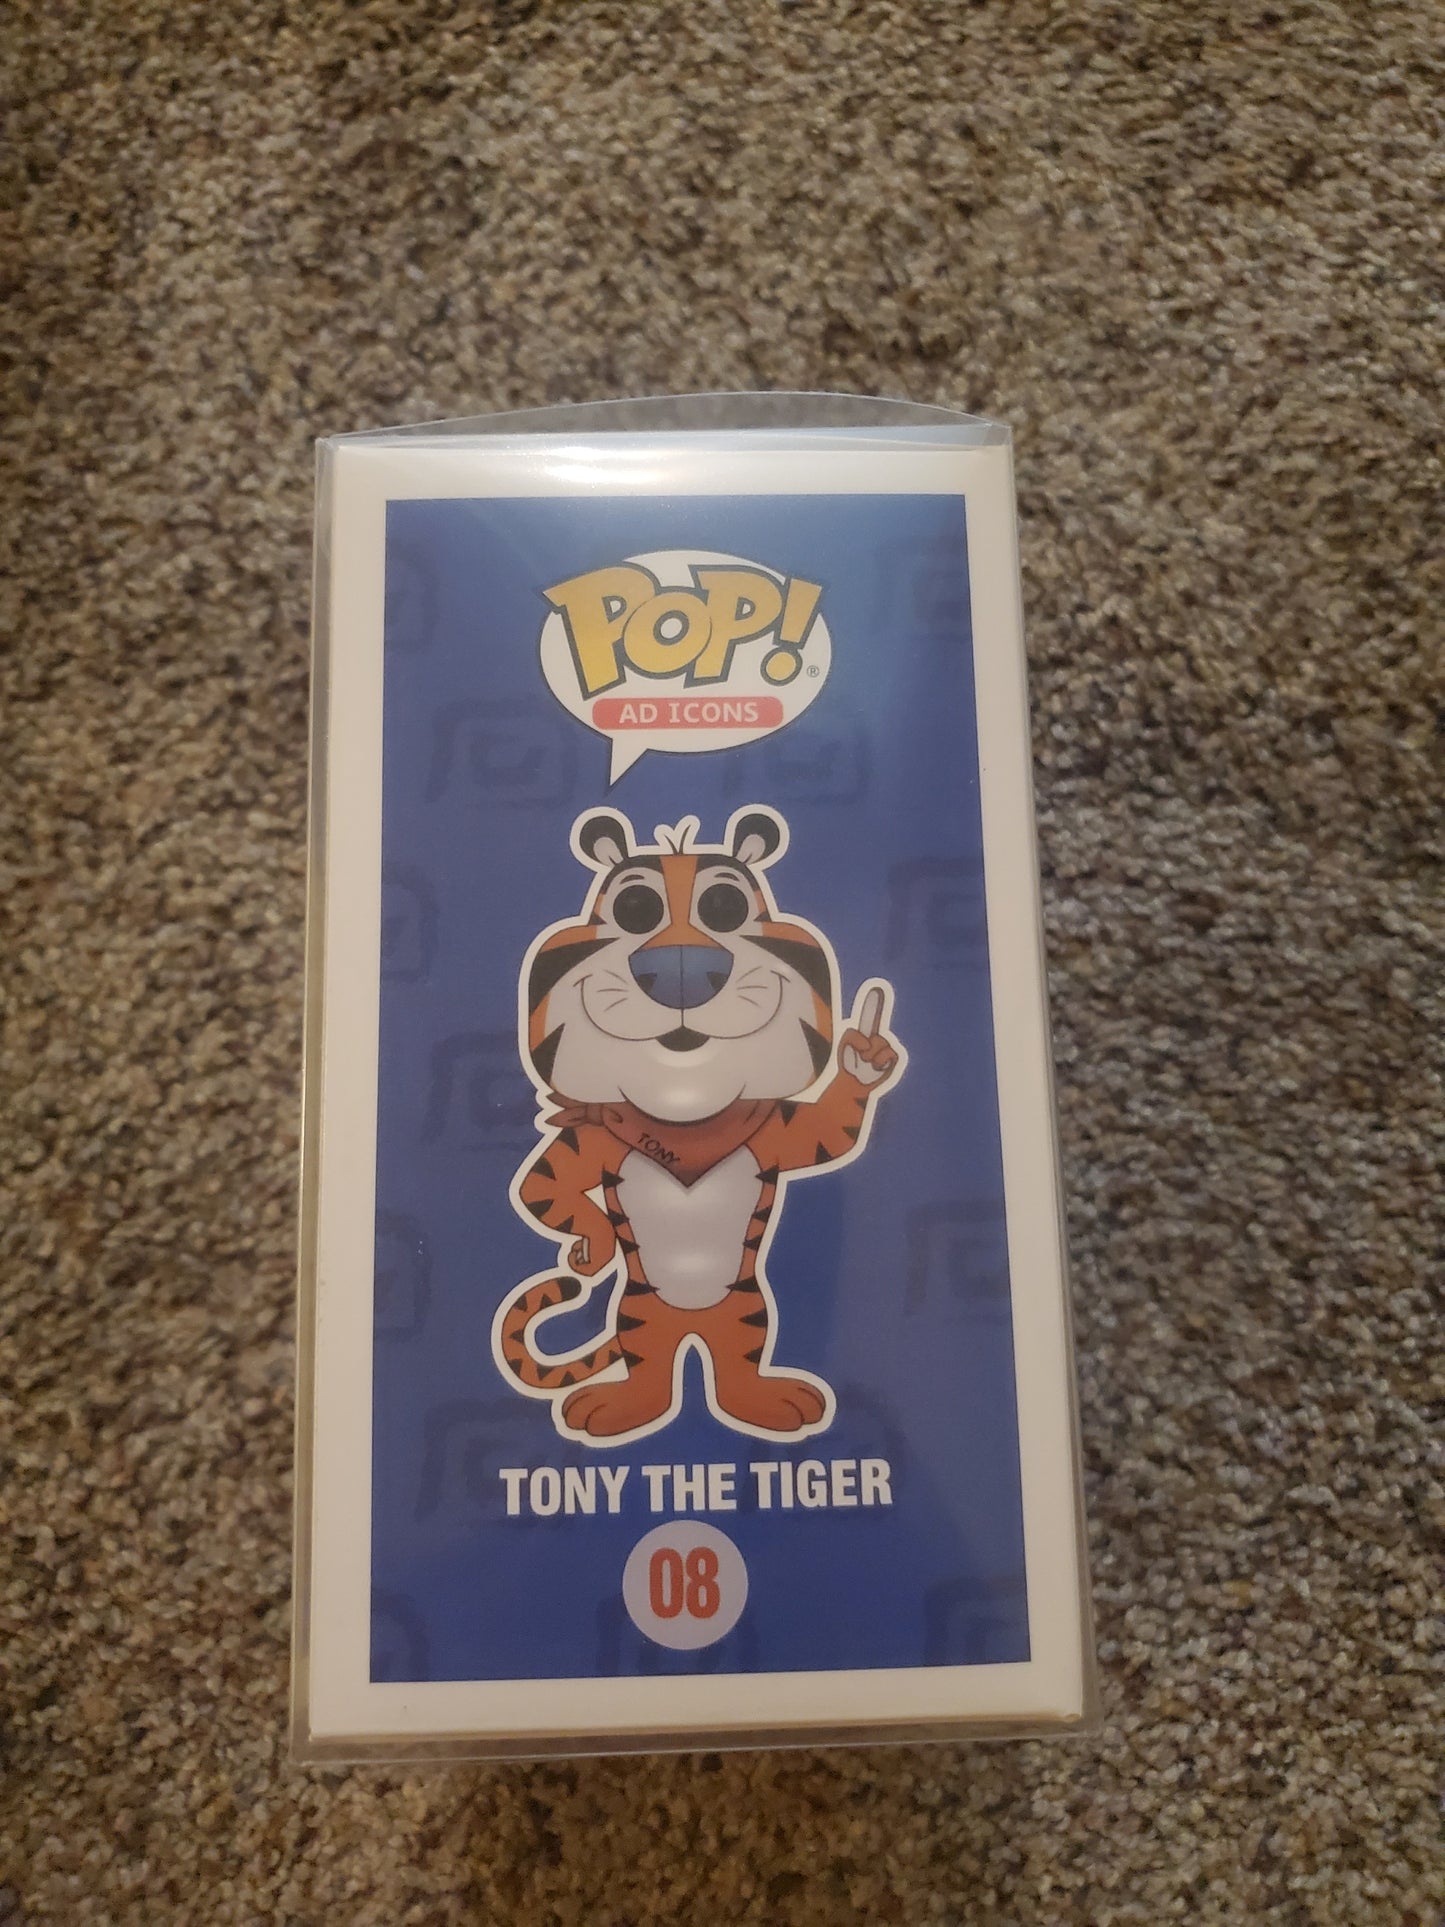 Funko Pop! Frosted Flakes Tony The Tiger Ad Icons #08 LE 3000 Excl POP Protector